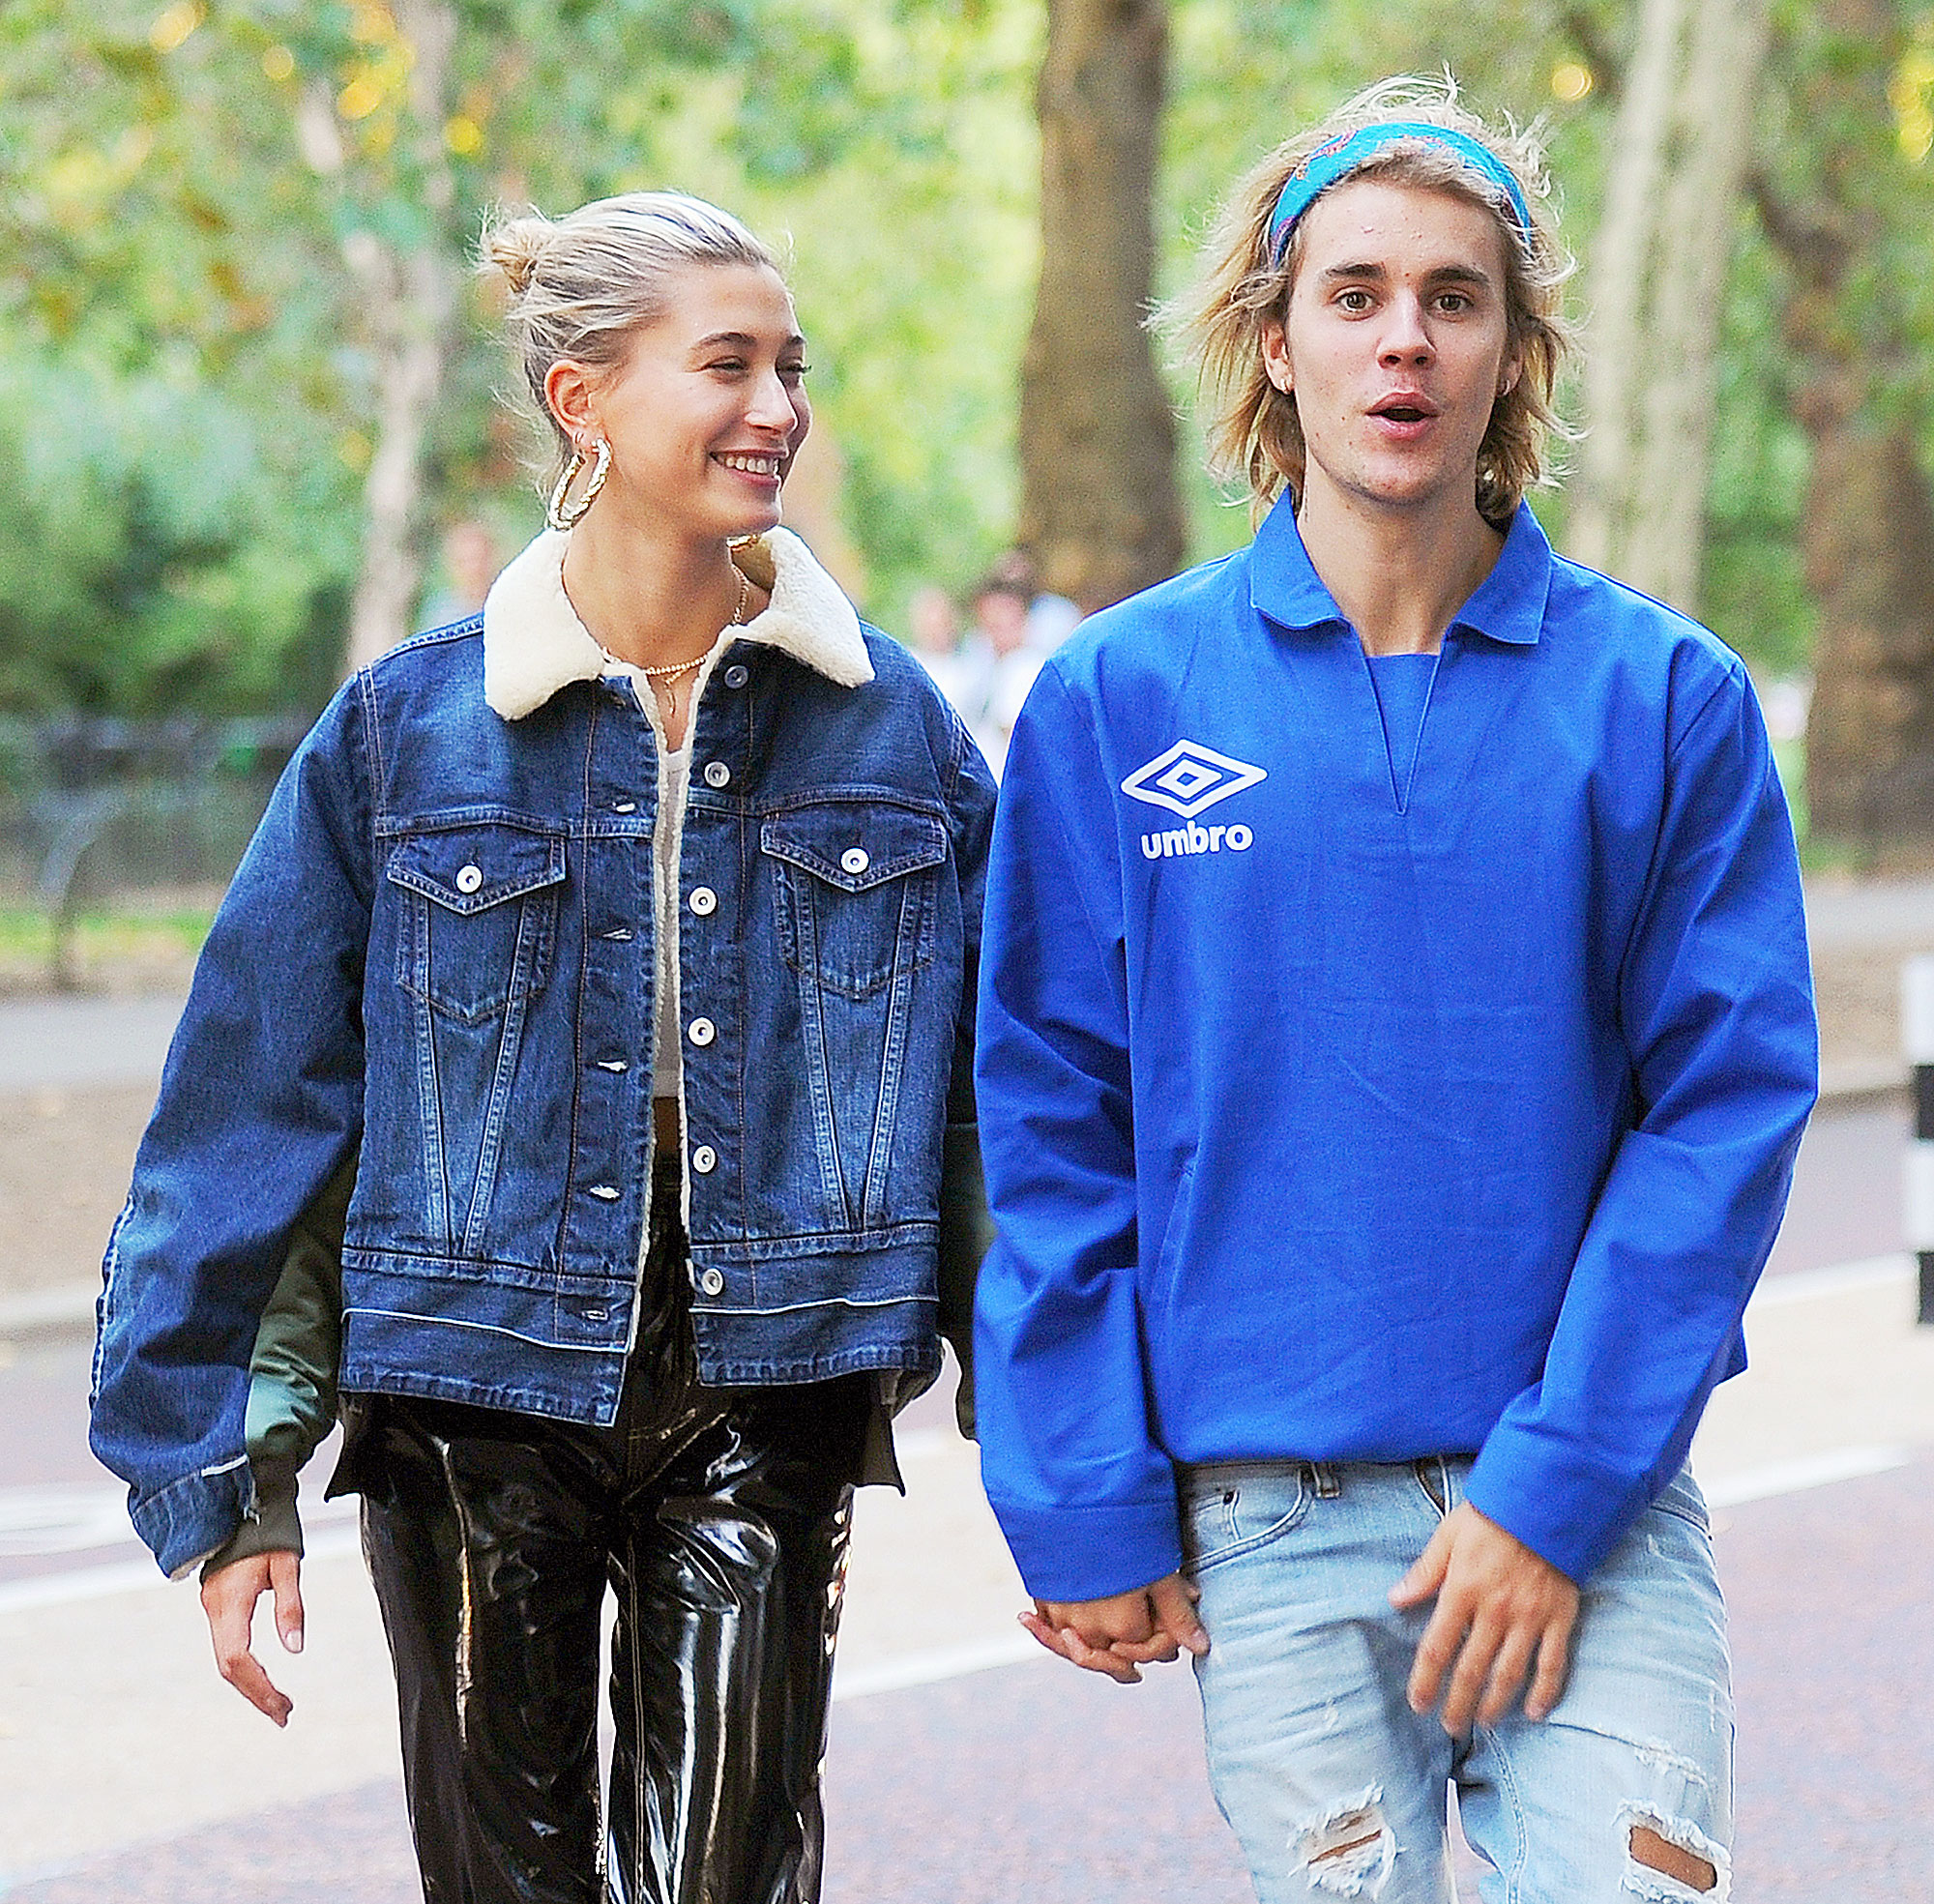 Hailey Baldwin's Huge Engagement Ring May Have Been Inspired By Blake Lively